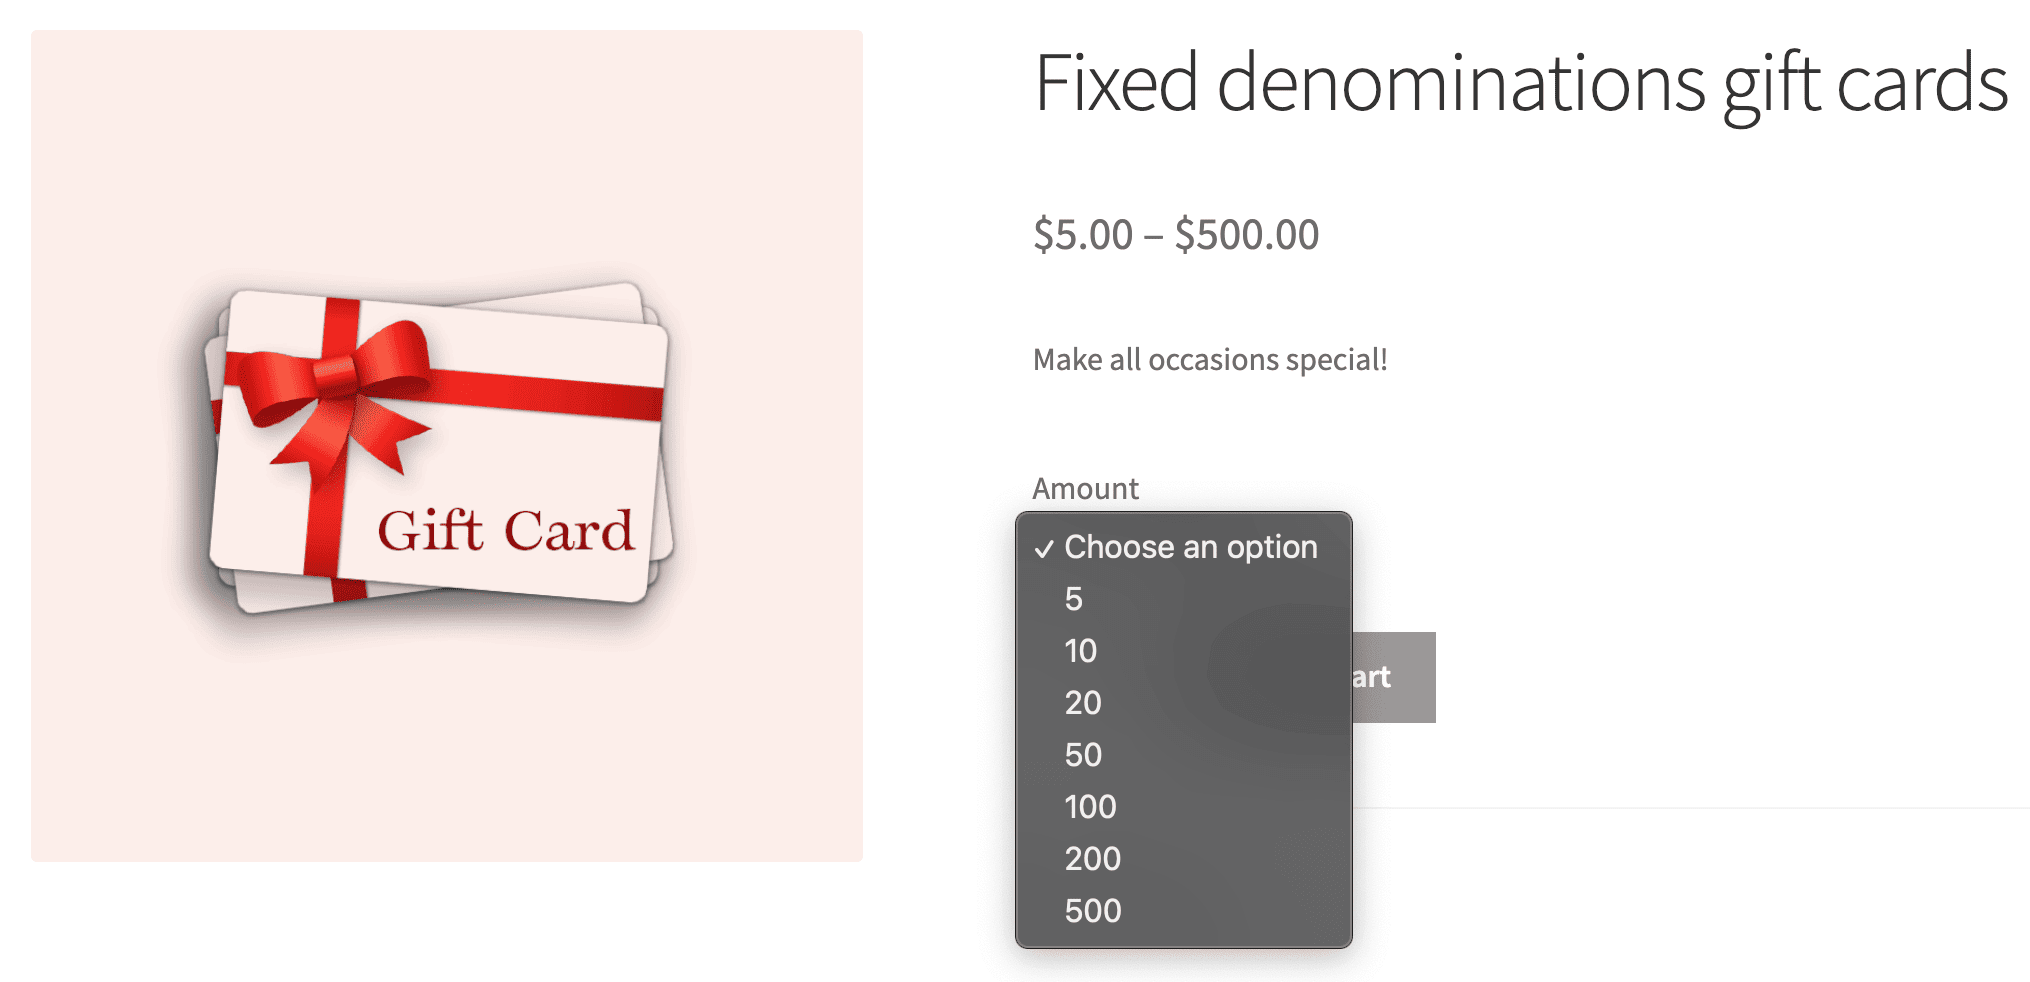 gift card ideas of fixed denominations